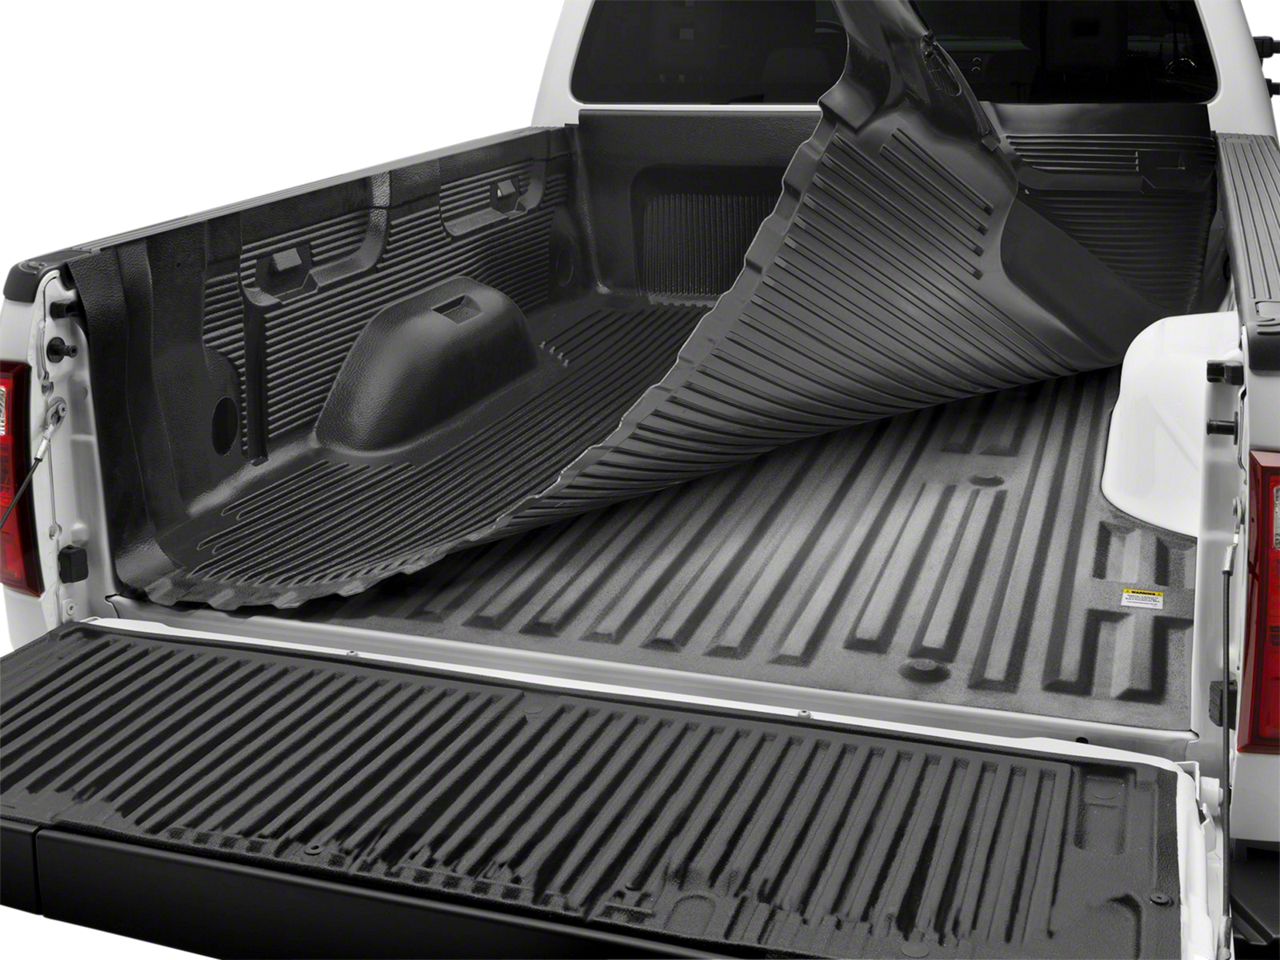 Thunderbird Bed and Tailgate Accessories